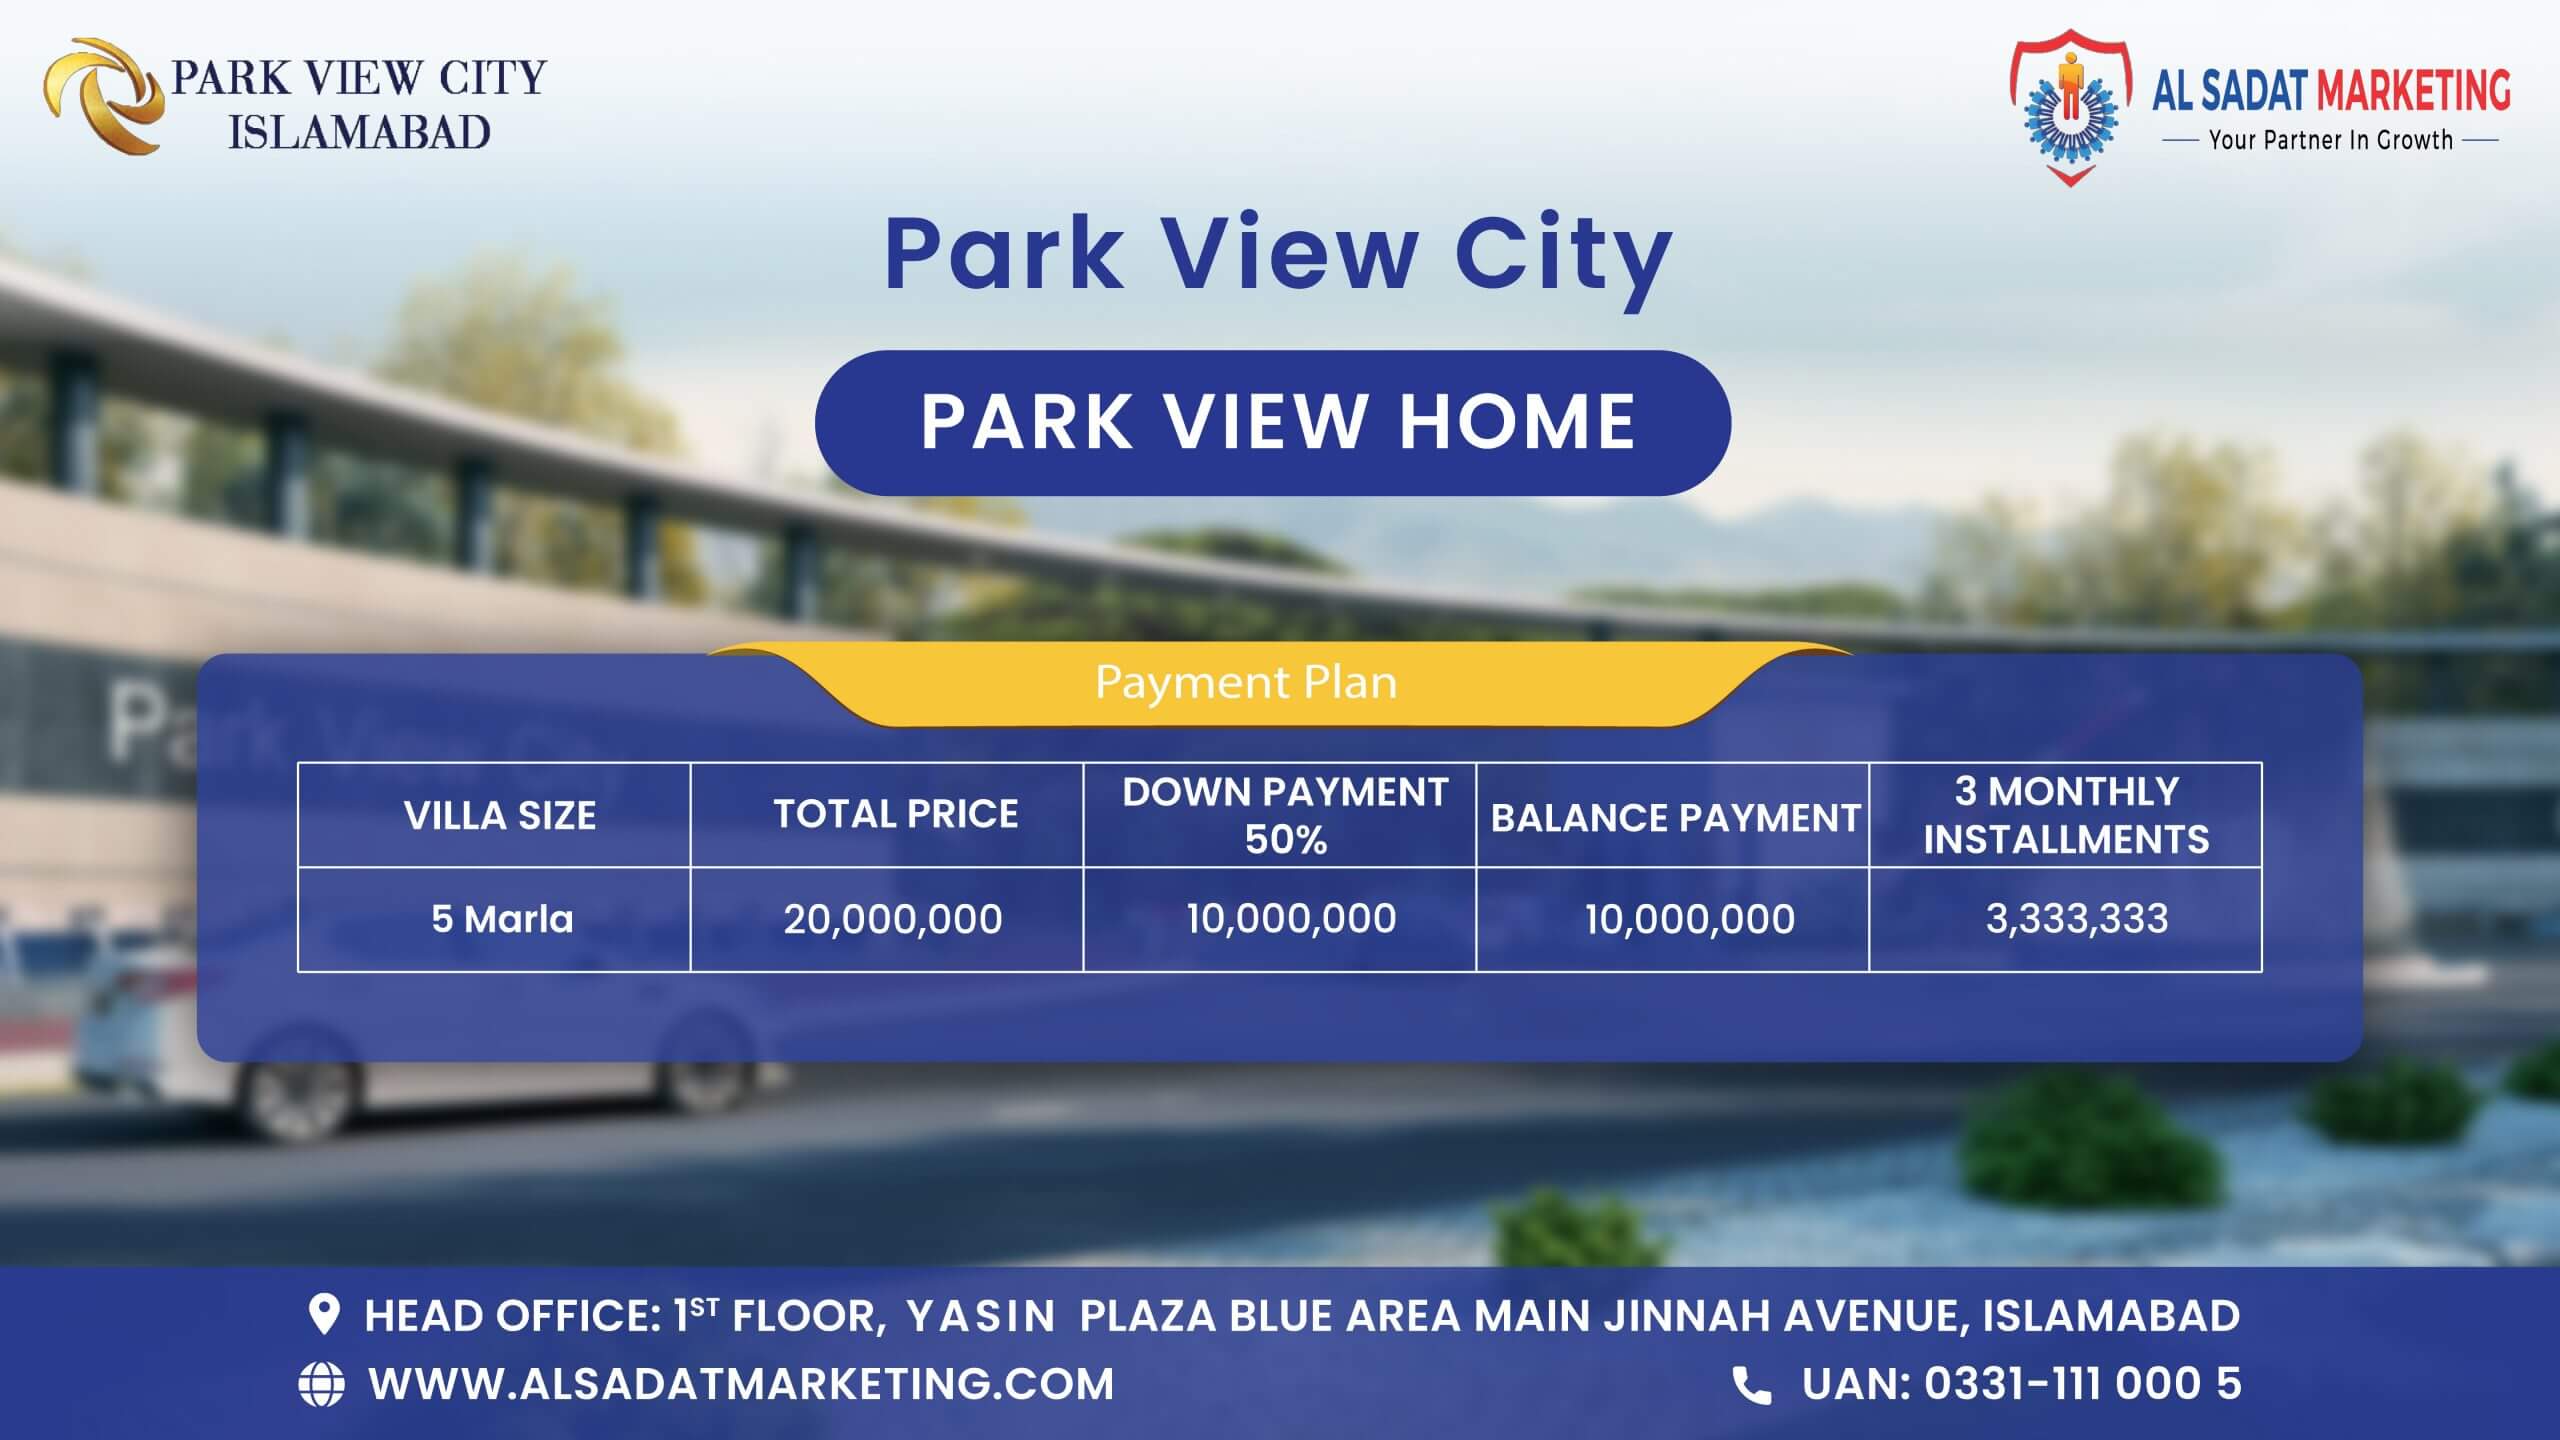 park view city islamabad homes updated payment plan - park view city homes updated payment plan - park view city islamabad payment plan - park view city payment plan - payment plan of park view city islamabad – payment plan of park view city – park view city islamabad – park view city – park view city housing society - park view city islamabad housing society – park view city real estate project - park view city islamabad real estate project - al sadat marketing - alsadat marketing - al-sadat marketing